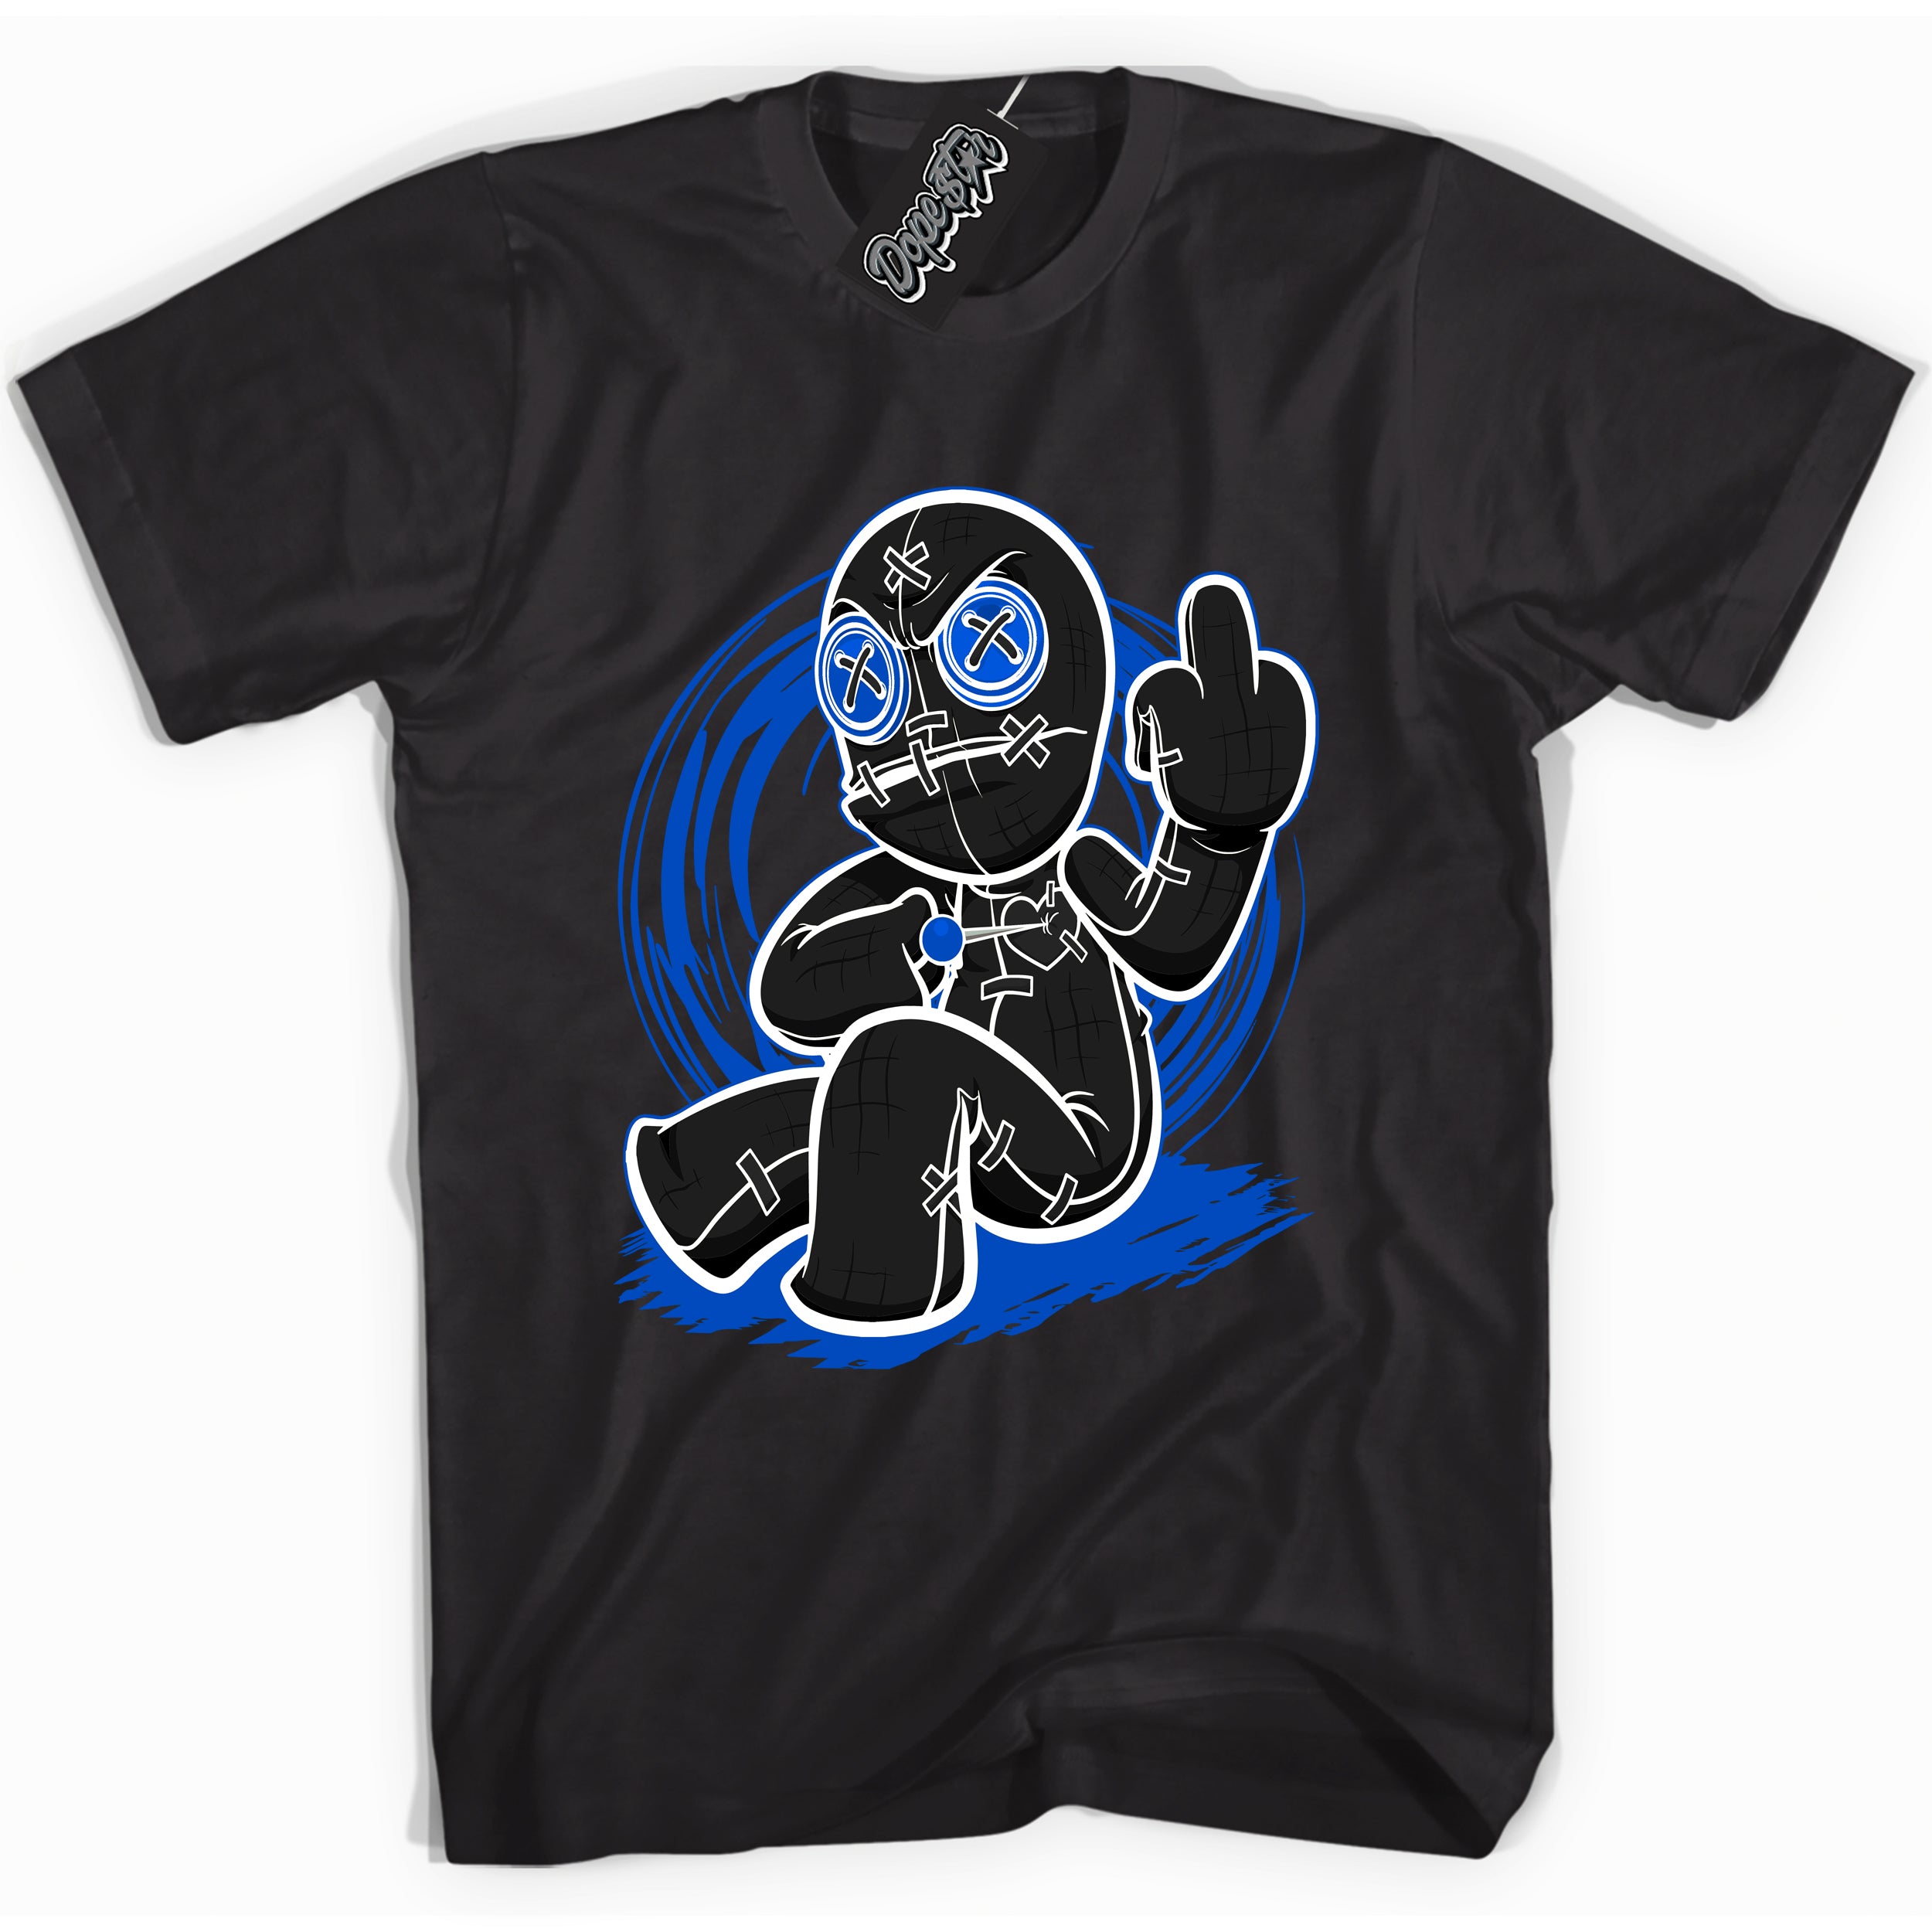 Cool Black graphic tee with "Voodoo Doll" design, that perfectly matches Royal Reimagined 1s sneakers 